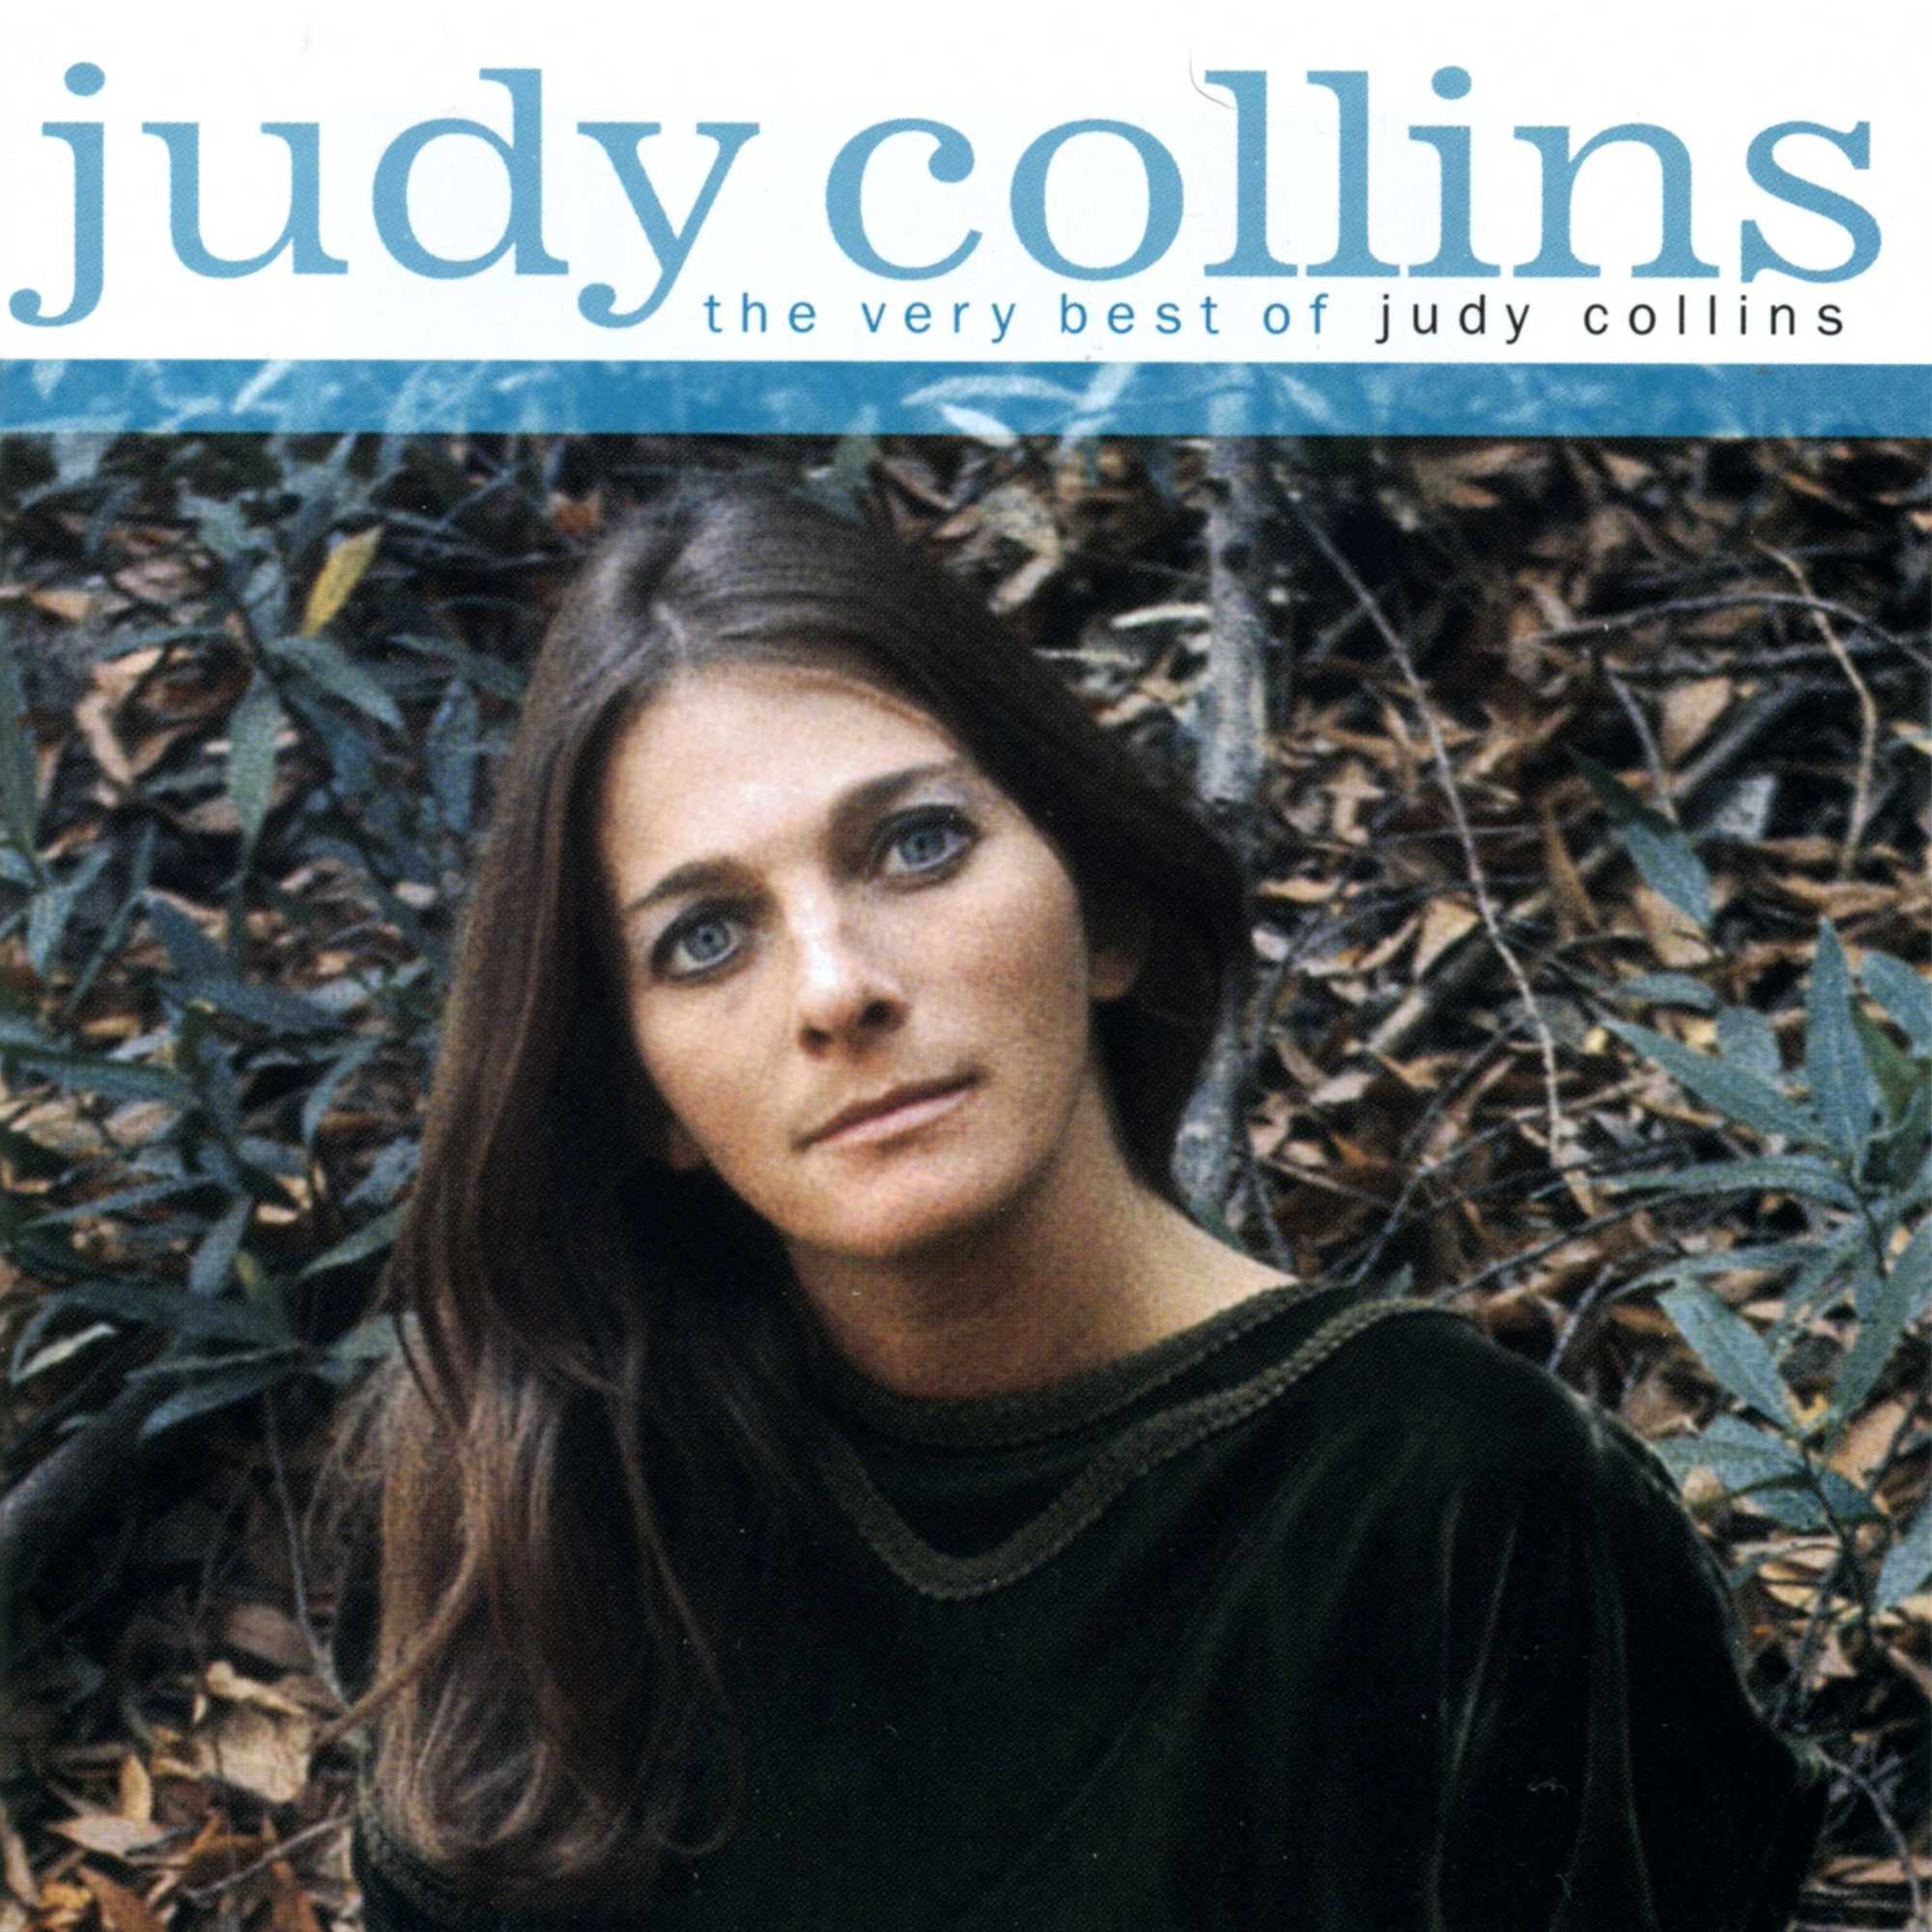 The Very Best Of Judy Collins - Front.jpg